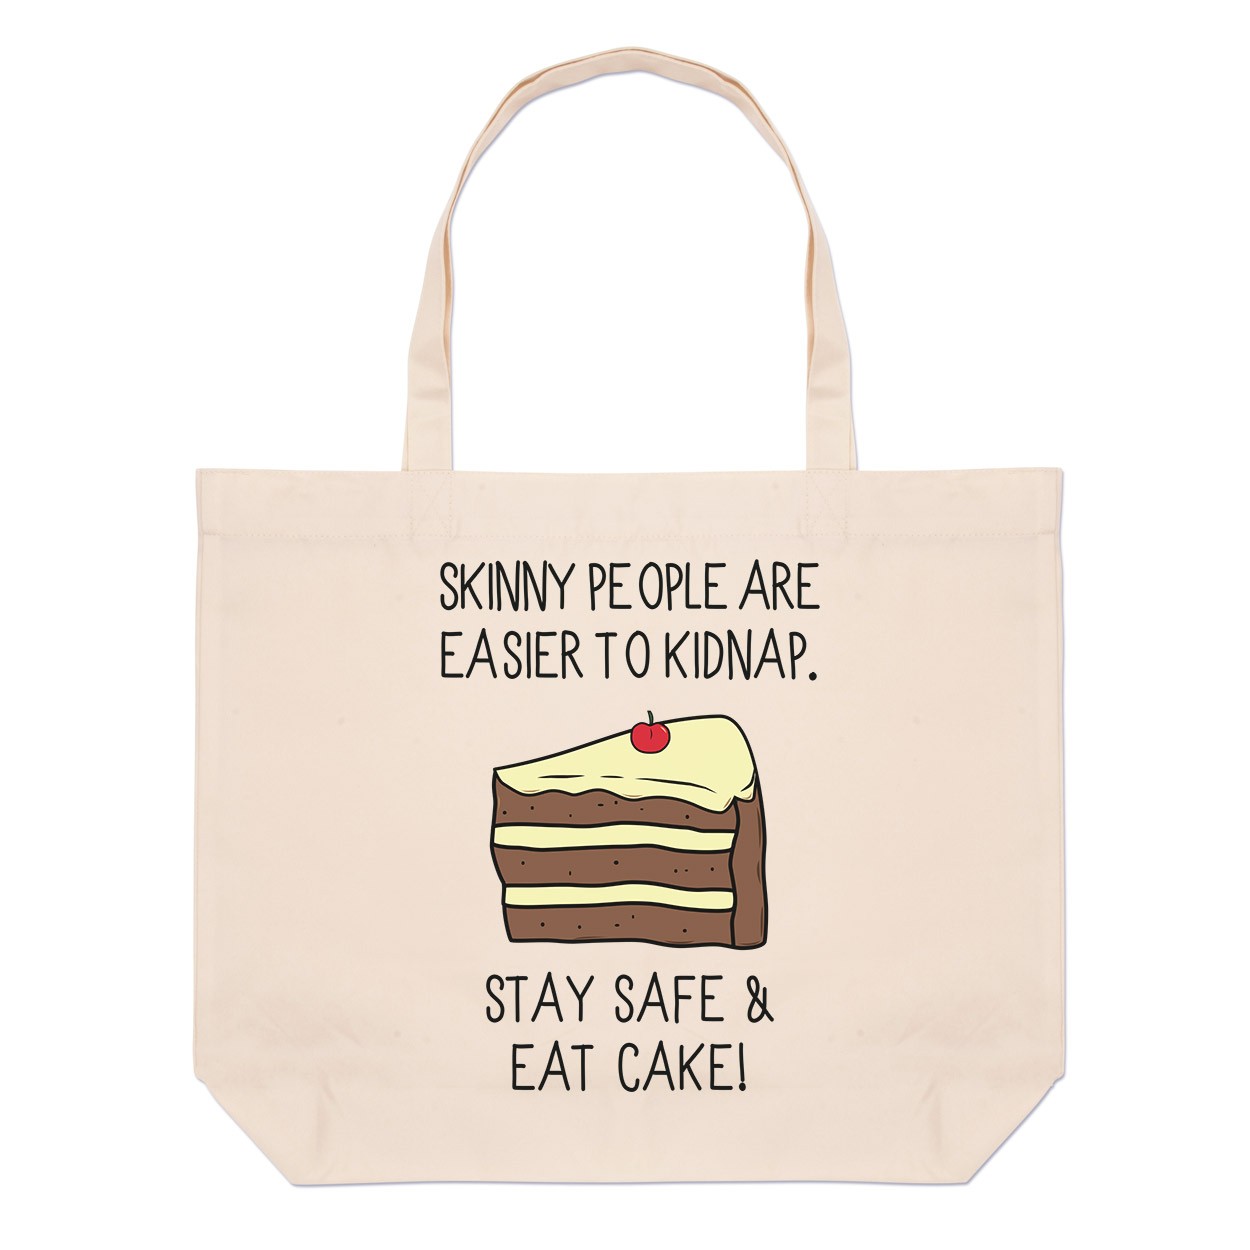 Skinny People Are Easier To Kidnap Stay Safe & Eat Cake Large Beach Tote Bag